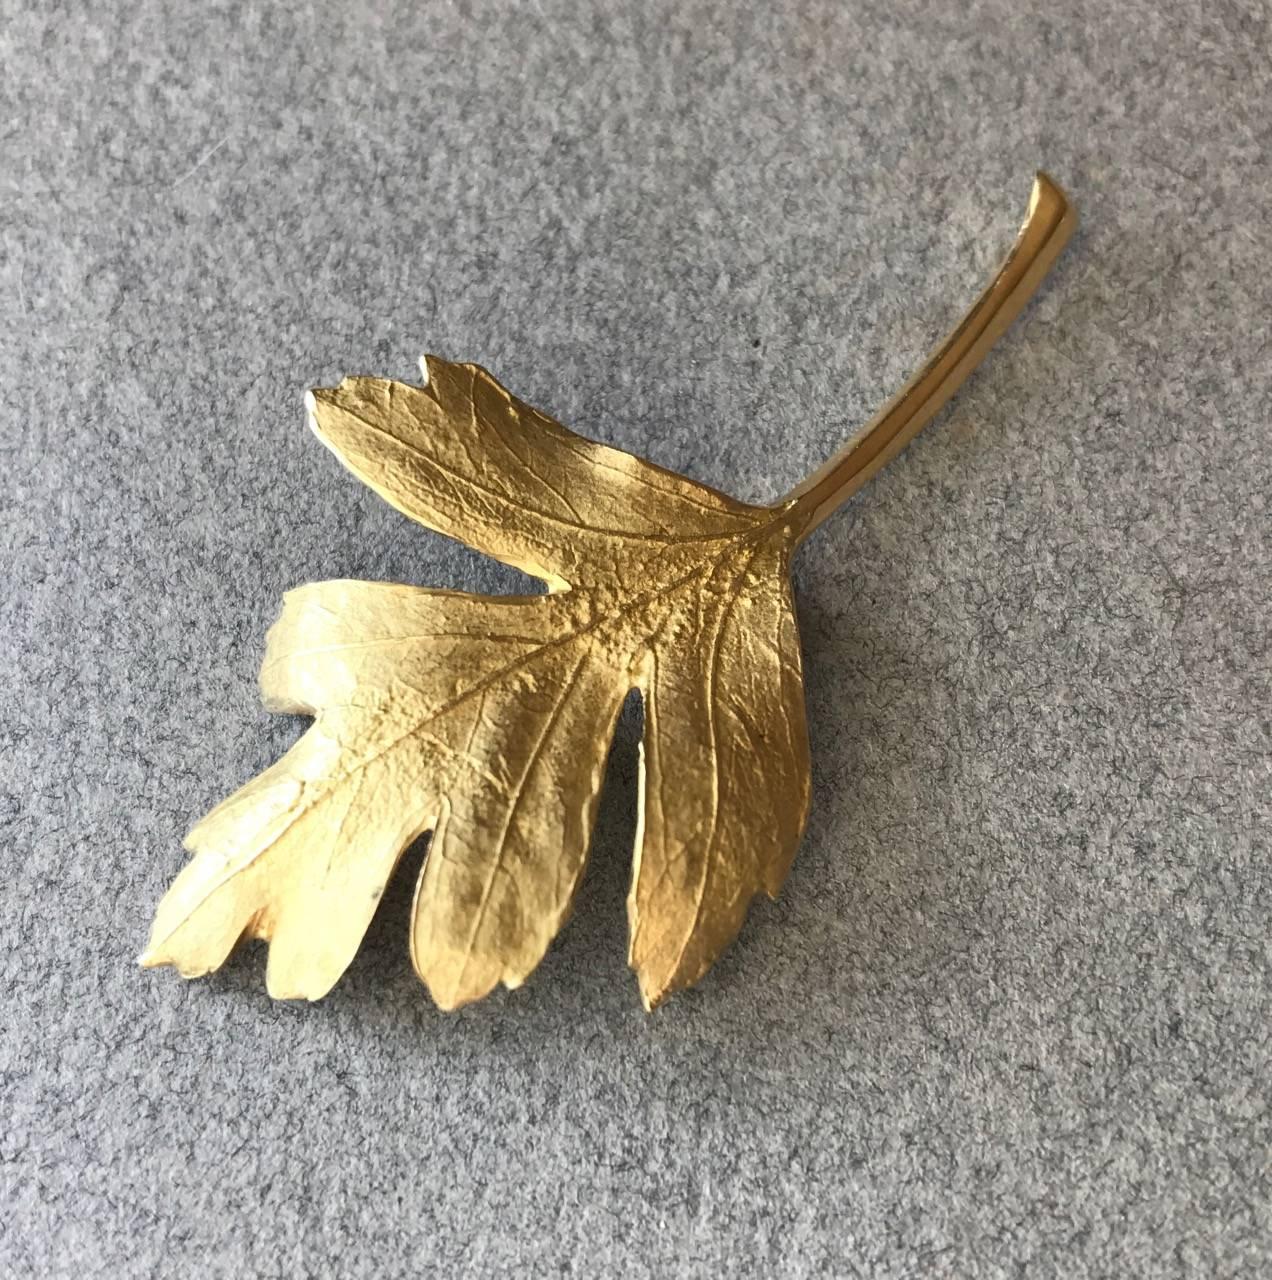 John Iversen 18kt Leaf Brooch Very Rare.  Made from a real leaf. Exquisite natural details.

Nice weight.

Complimentary gift box and FREE shipping included.

About the artist:
John Iversen is a German born Long Island, NY, jeweler who is best known